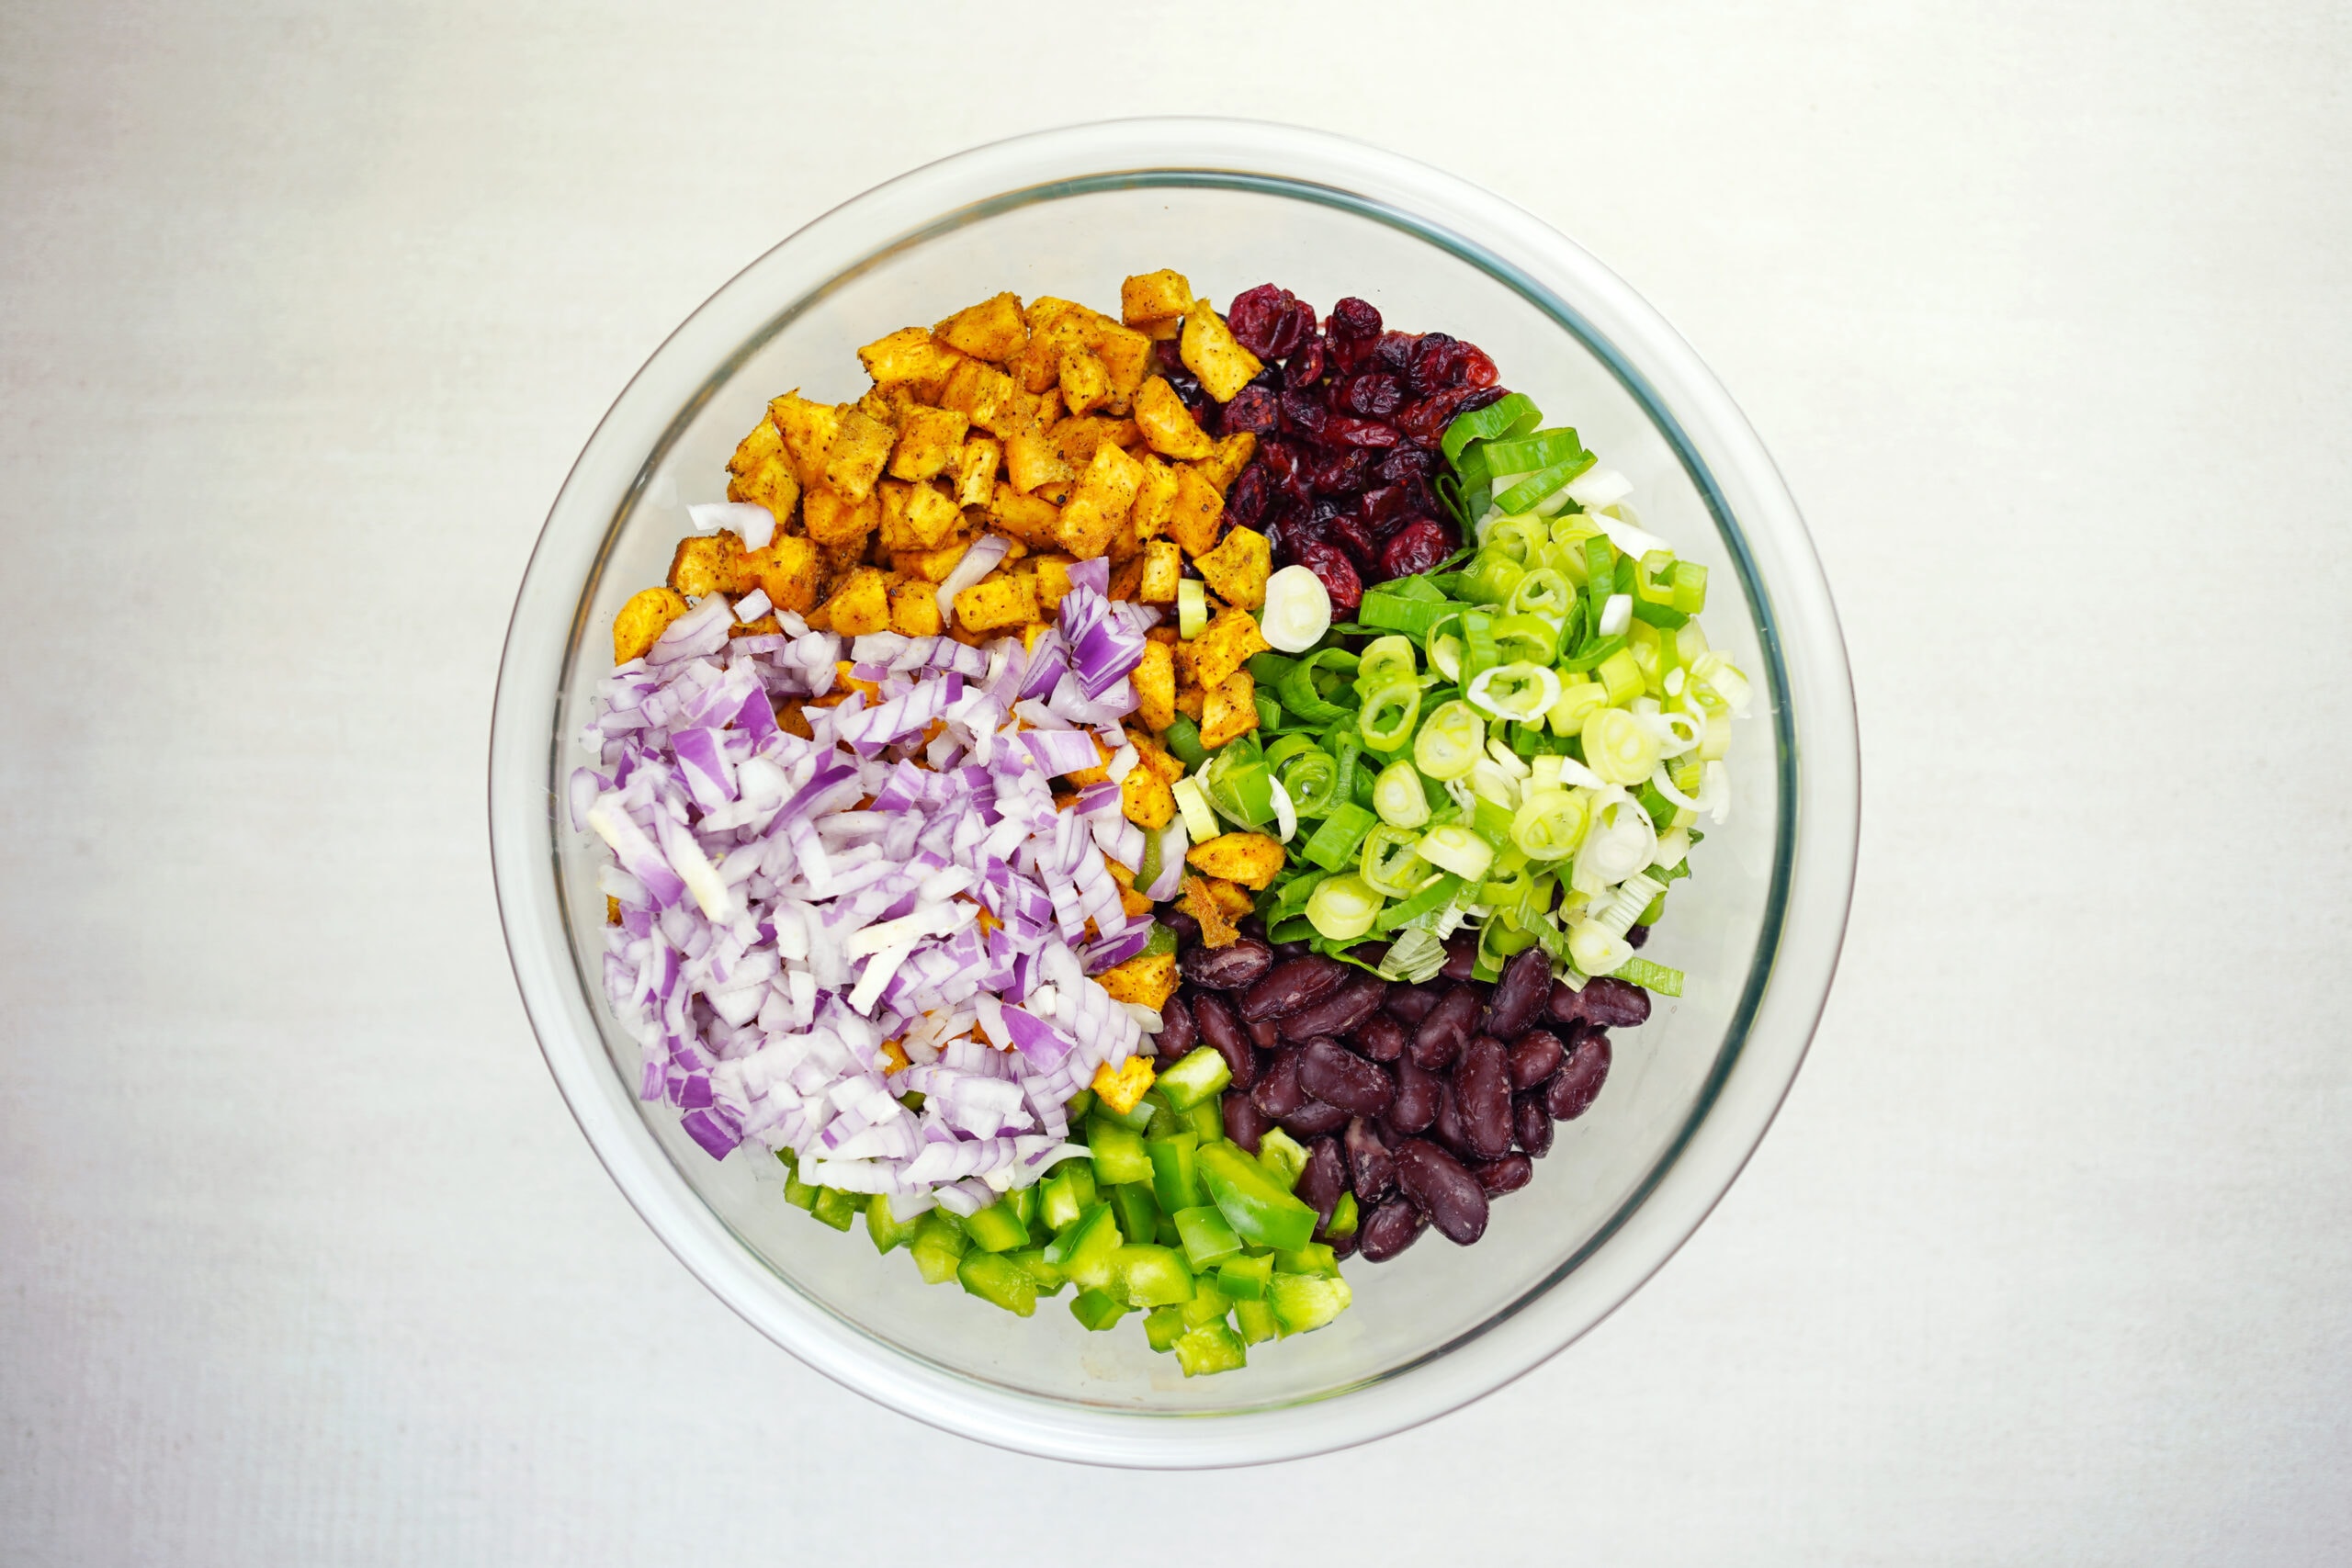 Colorful mixed salad ingredients in bowl.